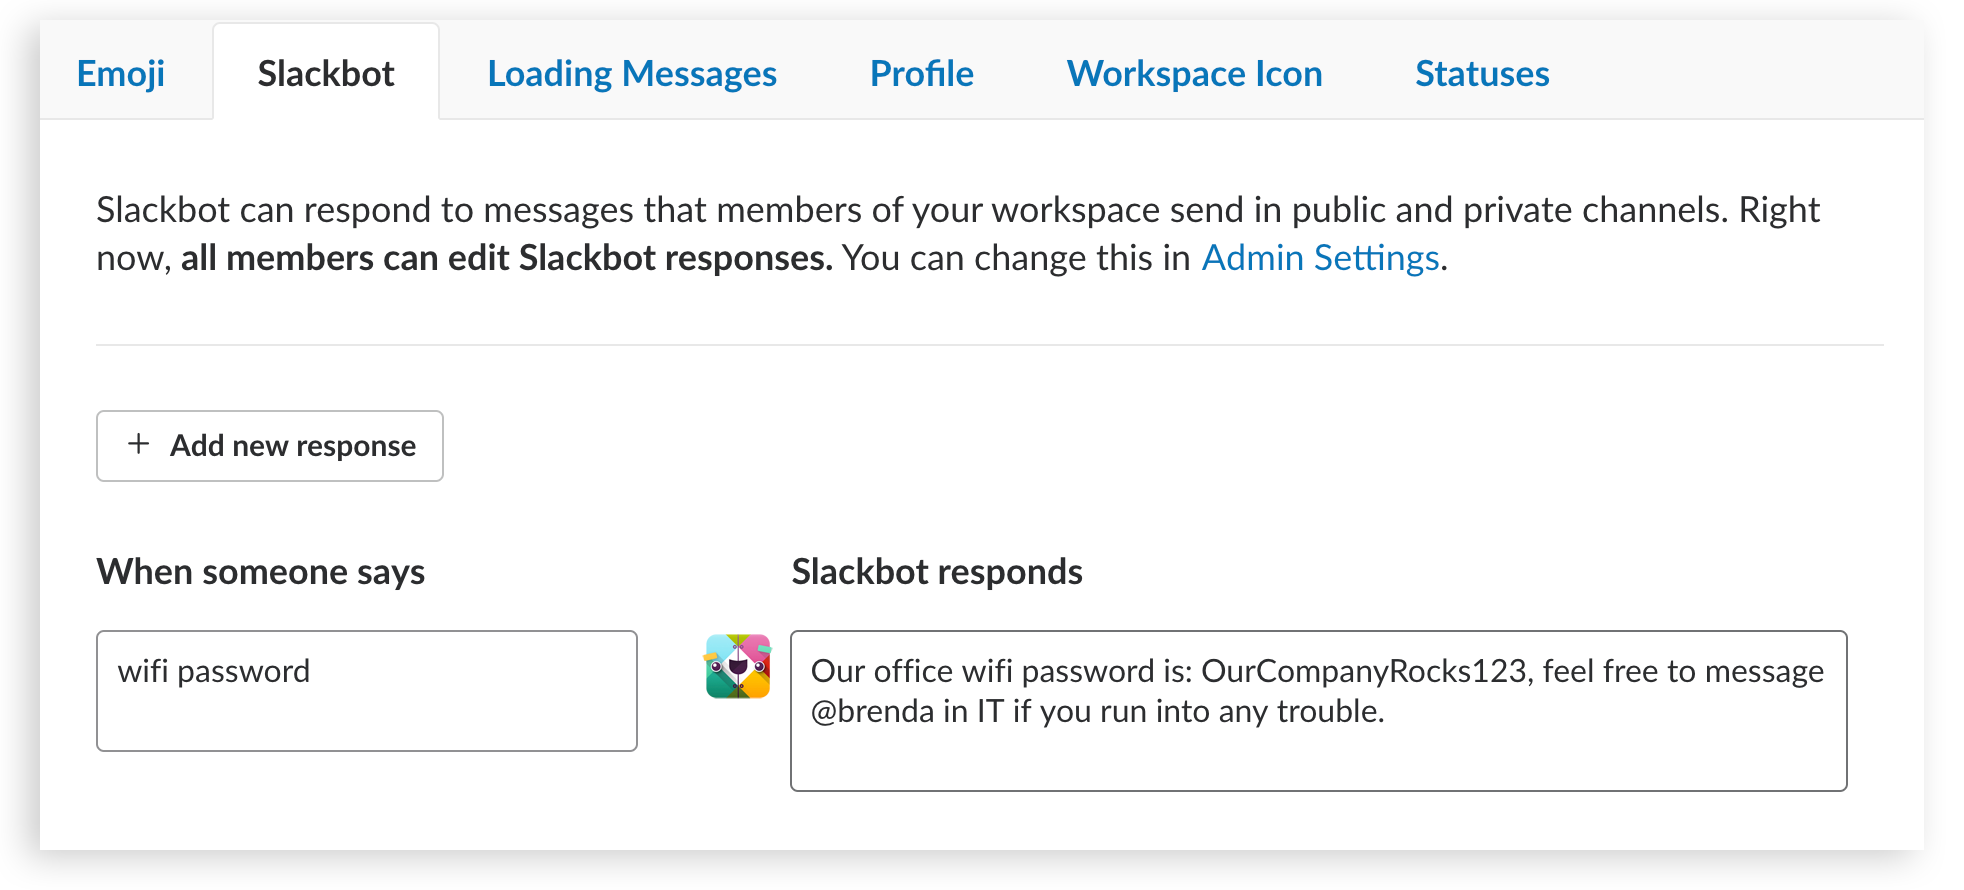 what is a slackbot